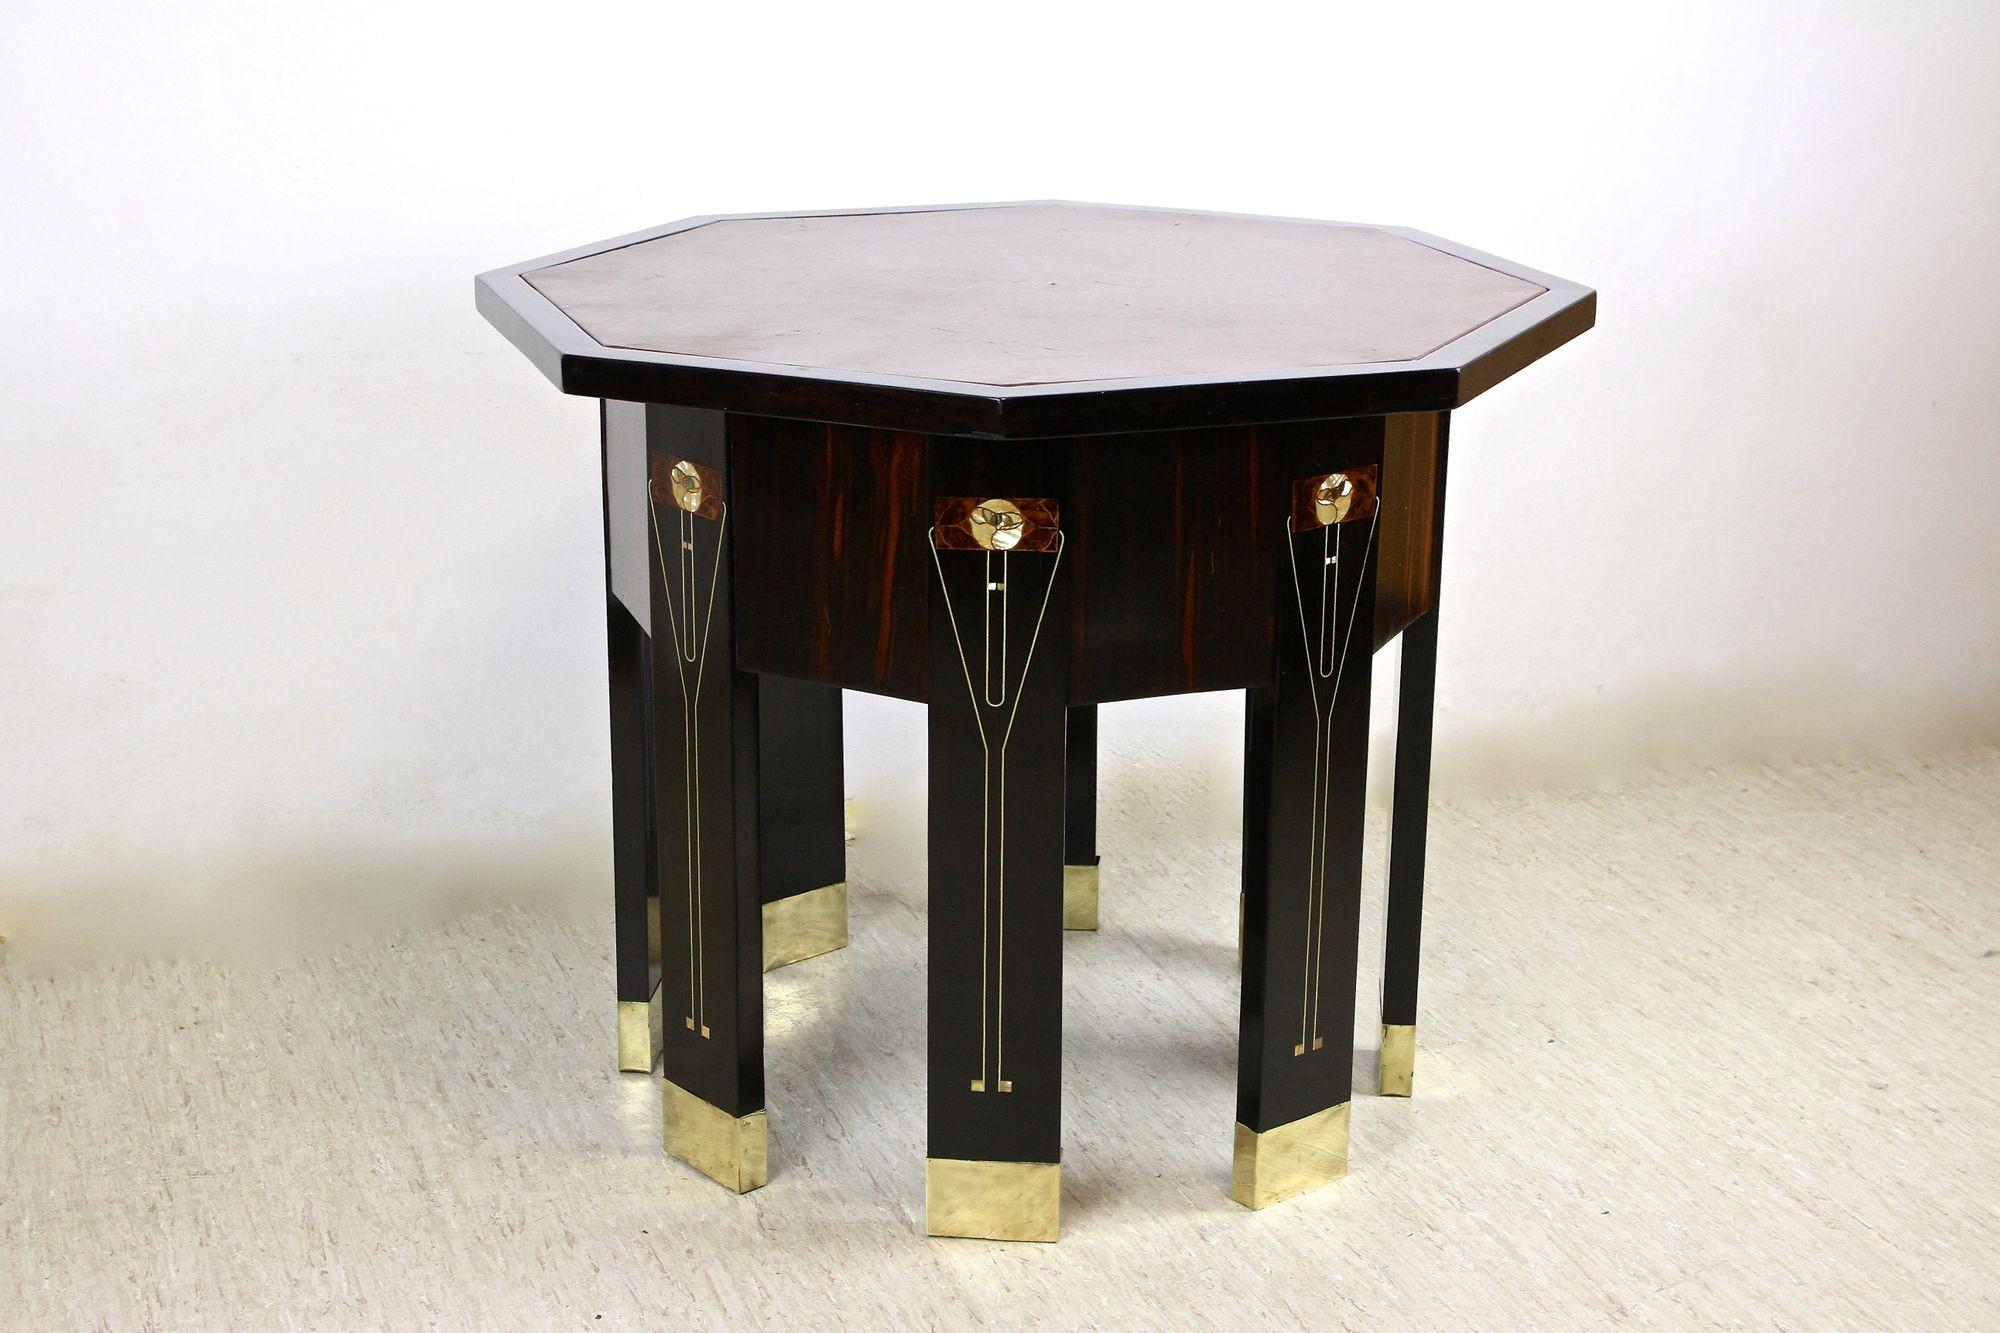 Art Nouveau Octagonal Palisander Table with Mother of Pearl Inlays, AT ca. 1905 For Sale 11